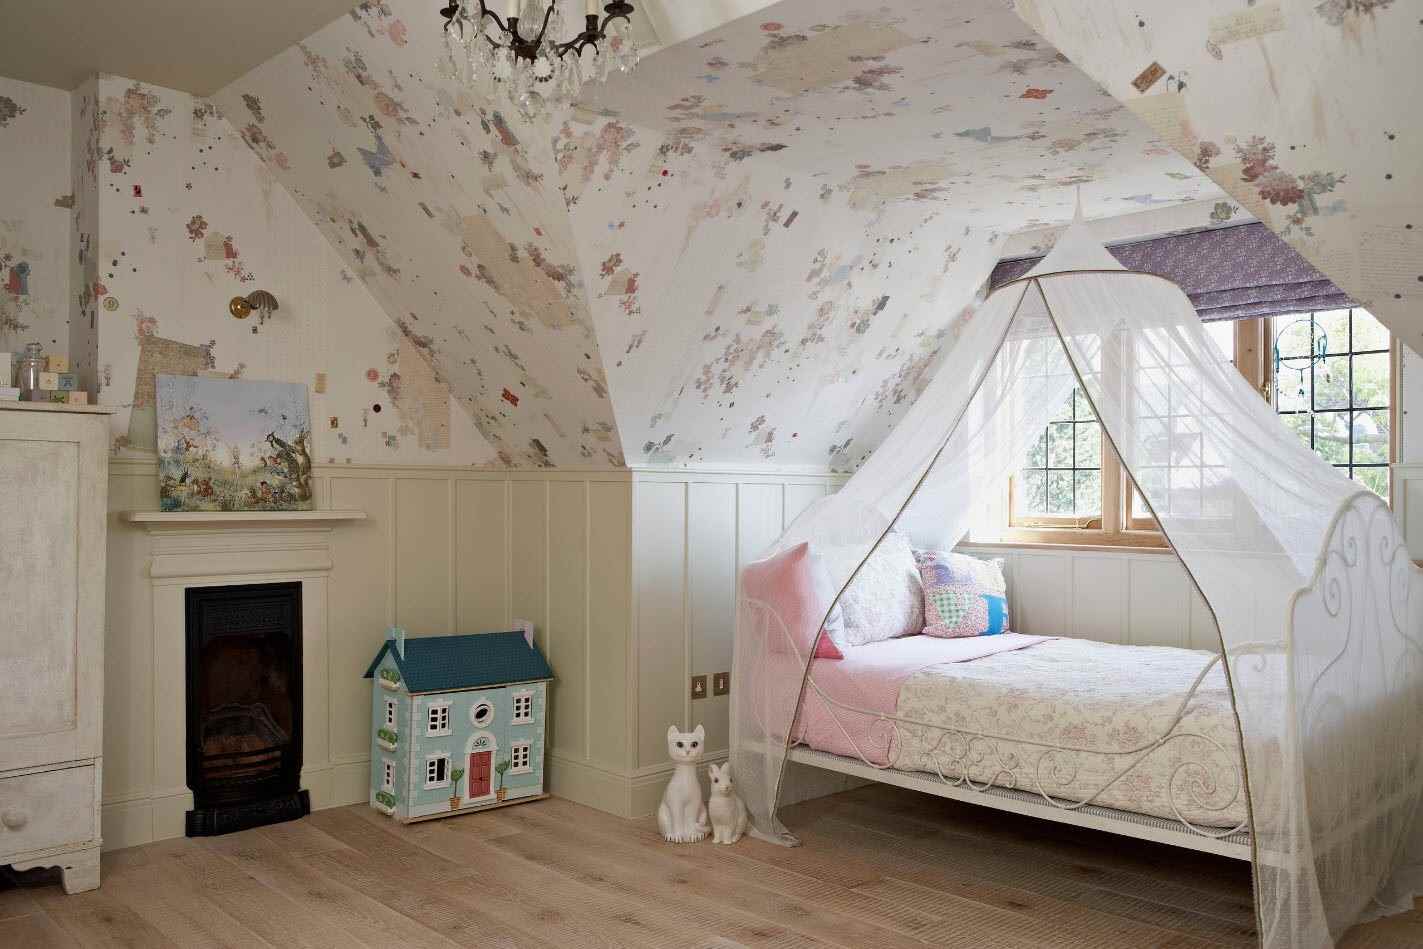 An example of a beautiful design of a children's room for a girl